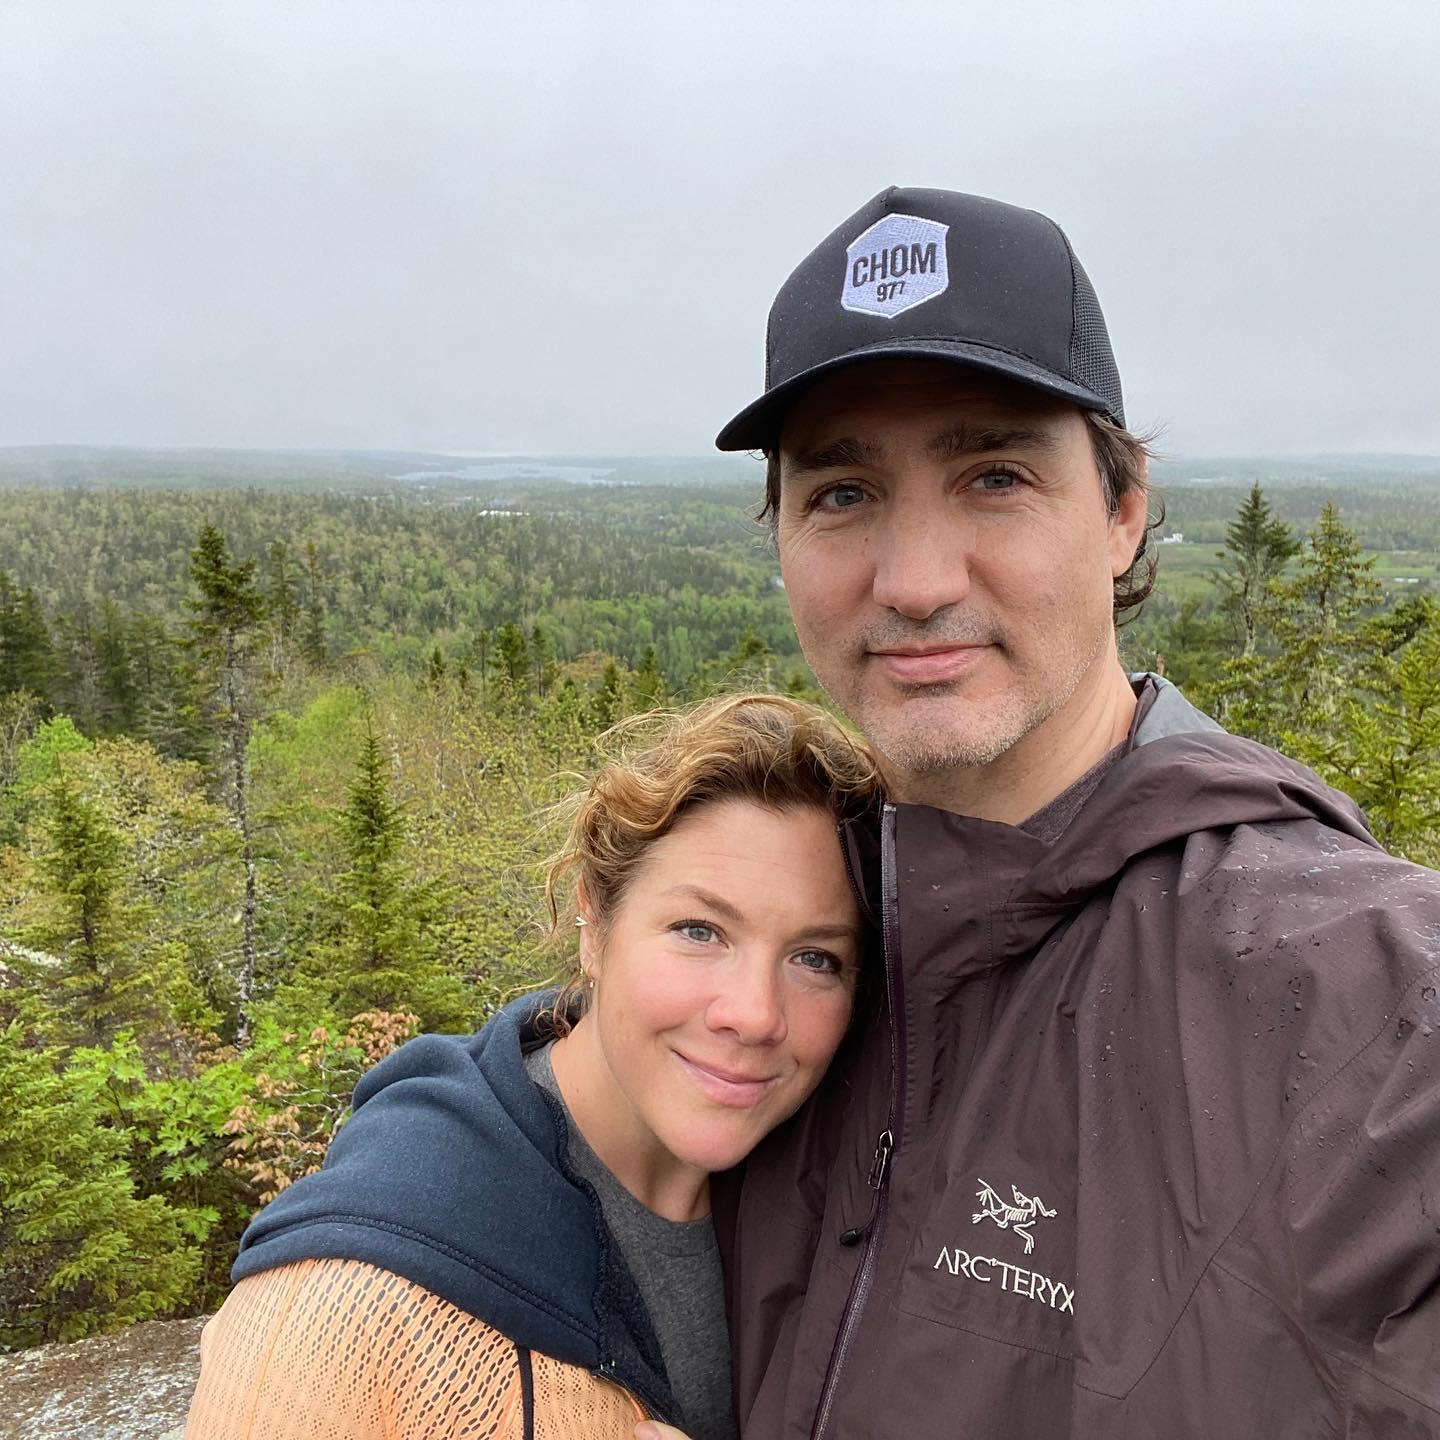 Justin Trudeau and his wife Sophie